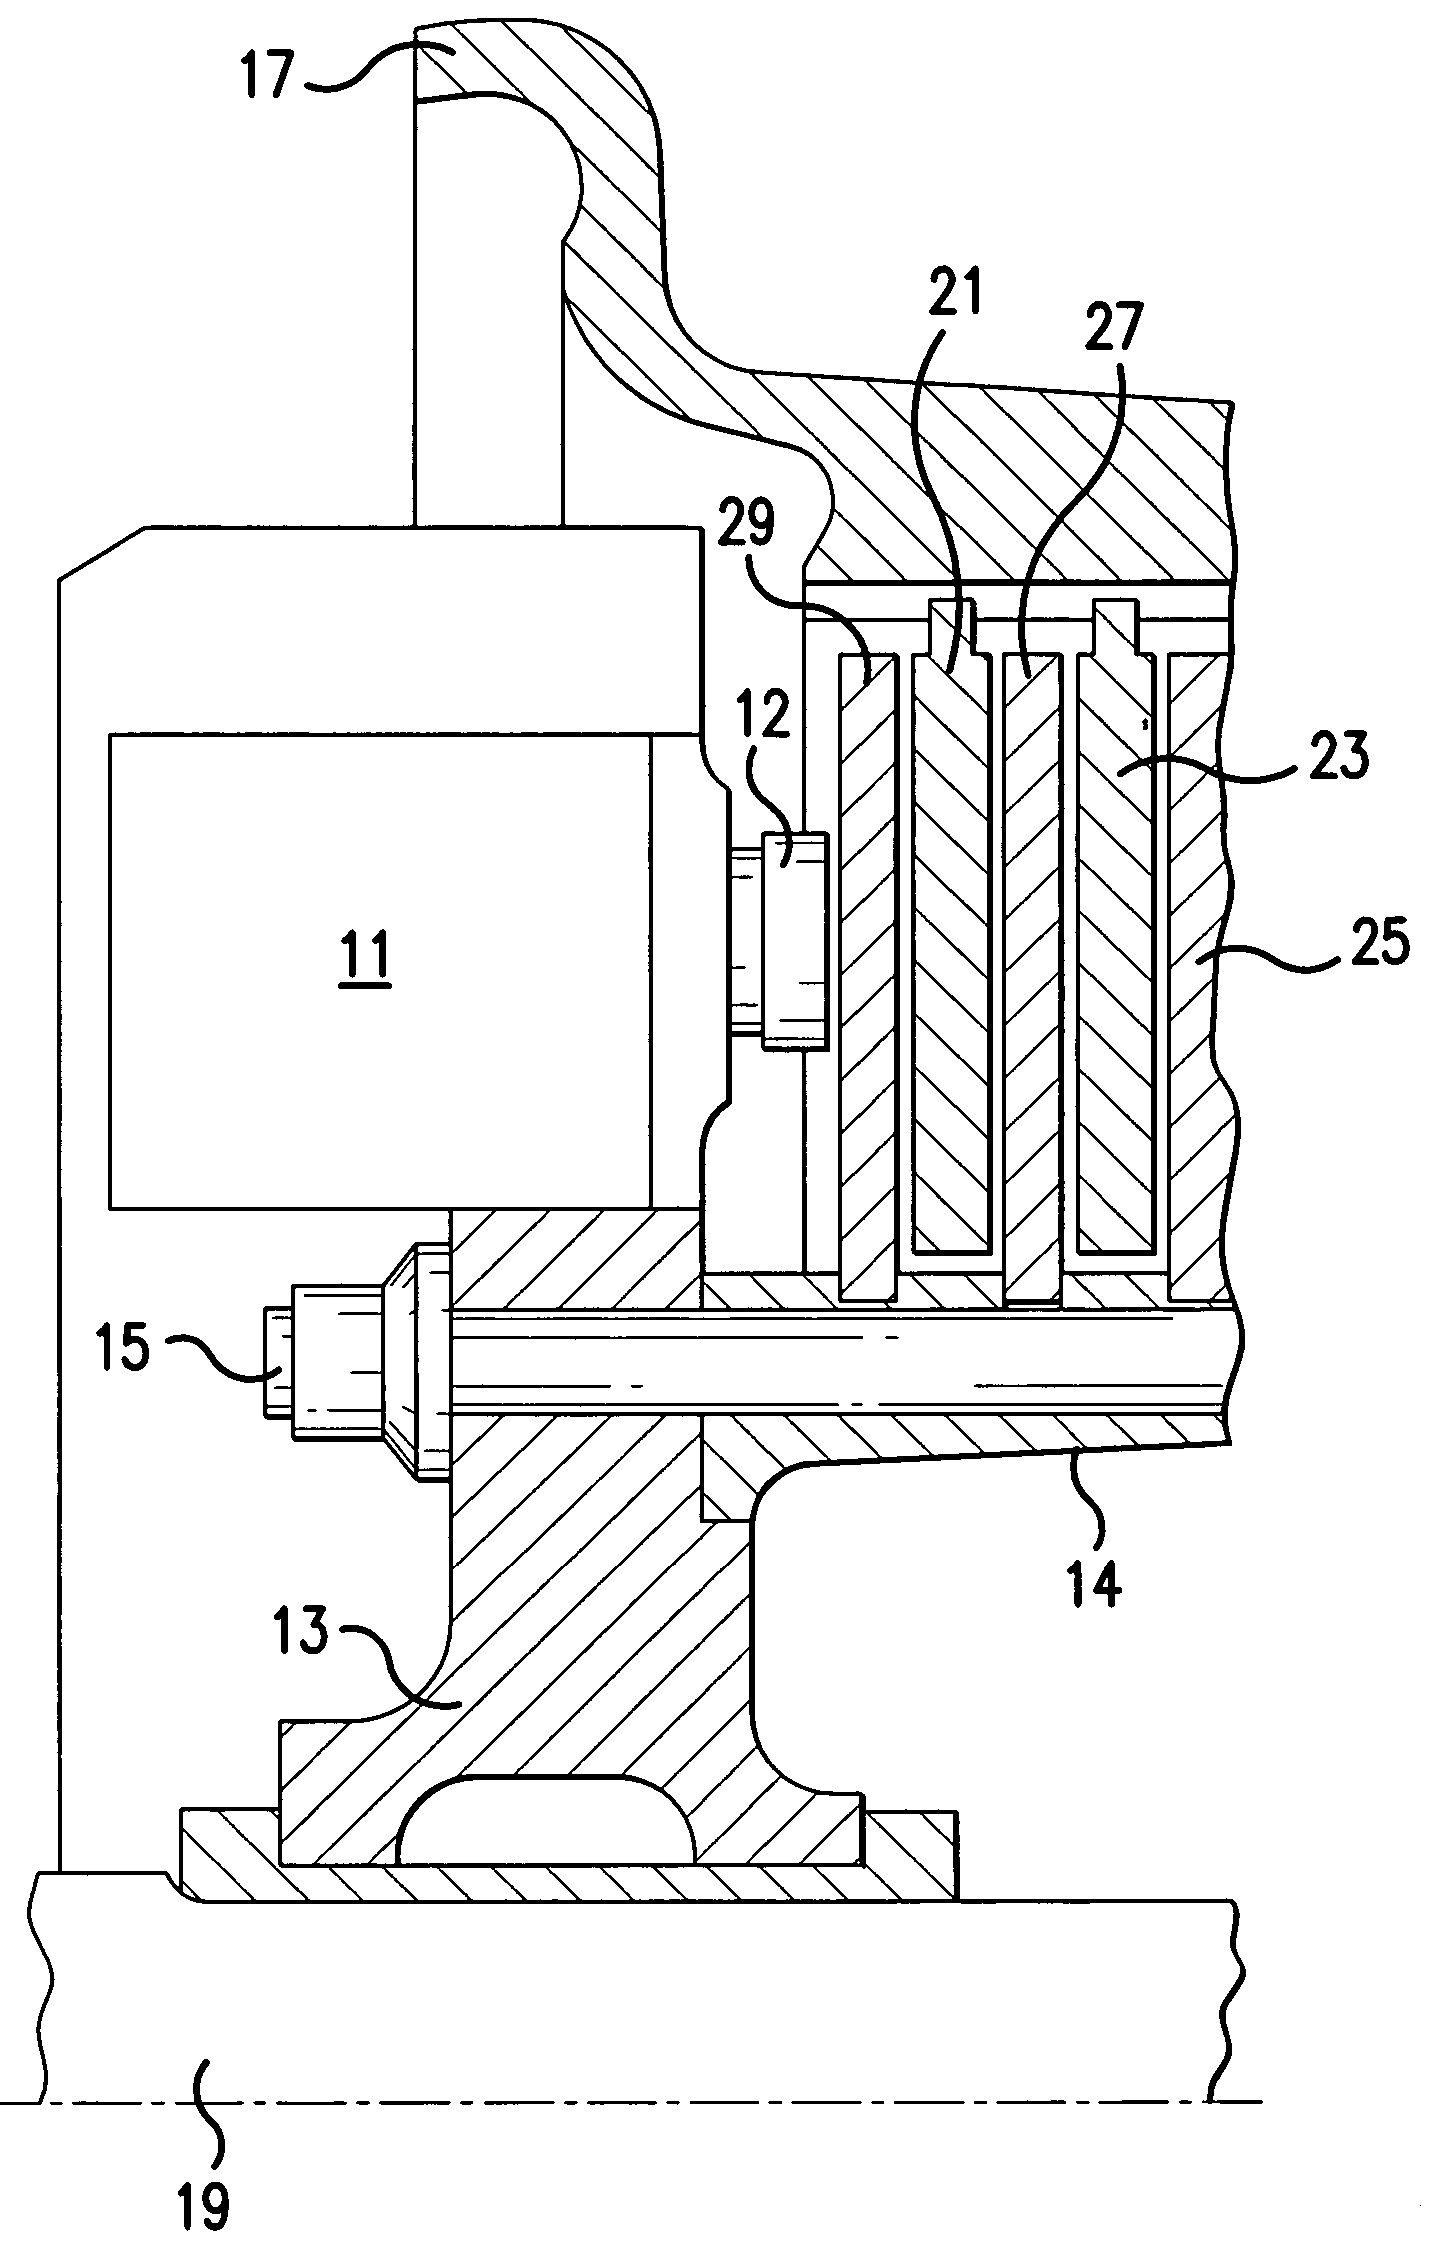 Electric park brake mechanism and method of operating an electric brake to perform a park brake function